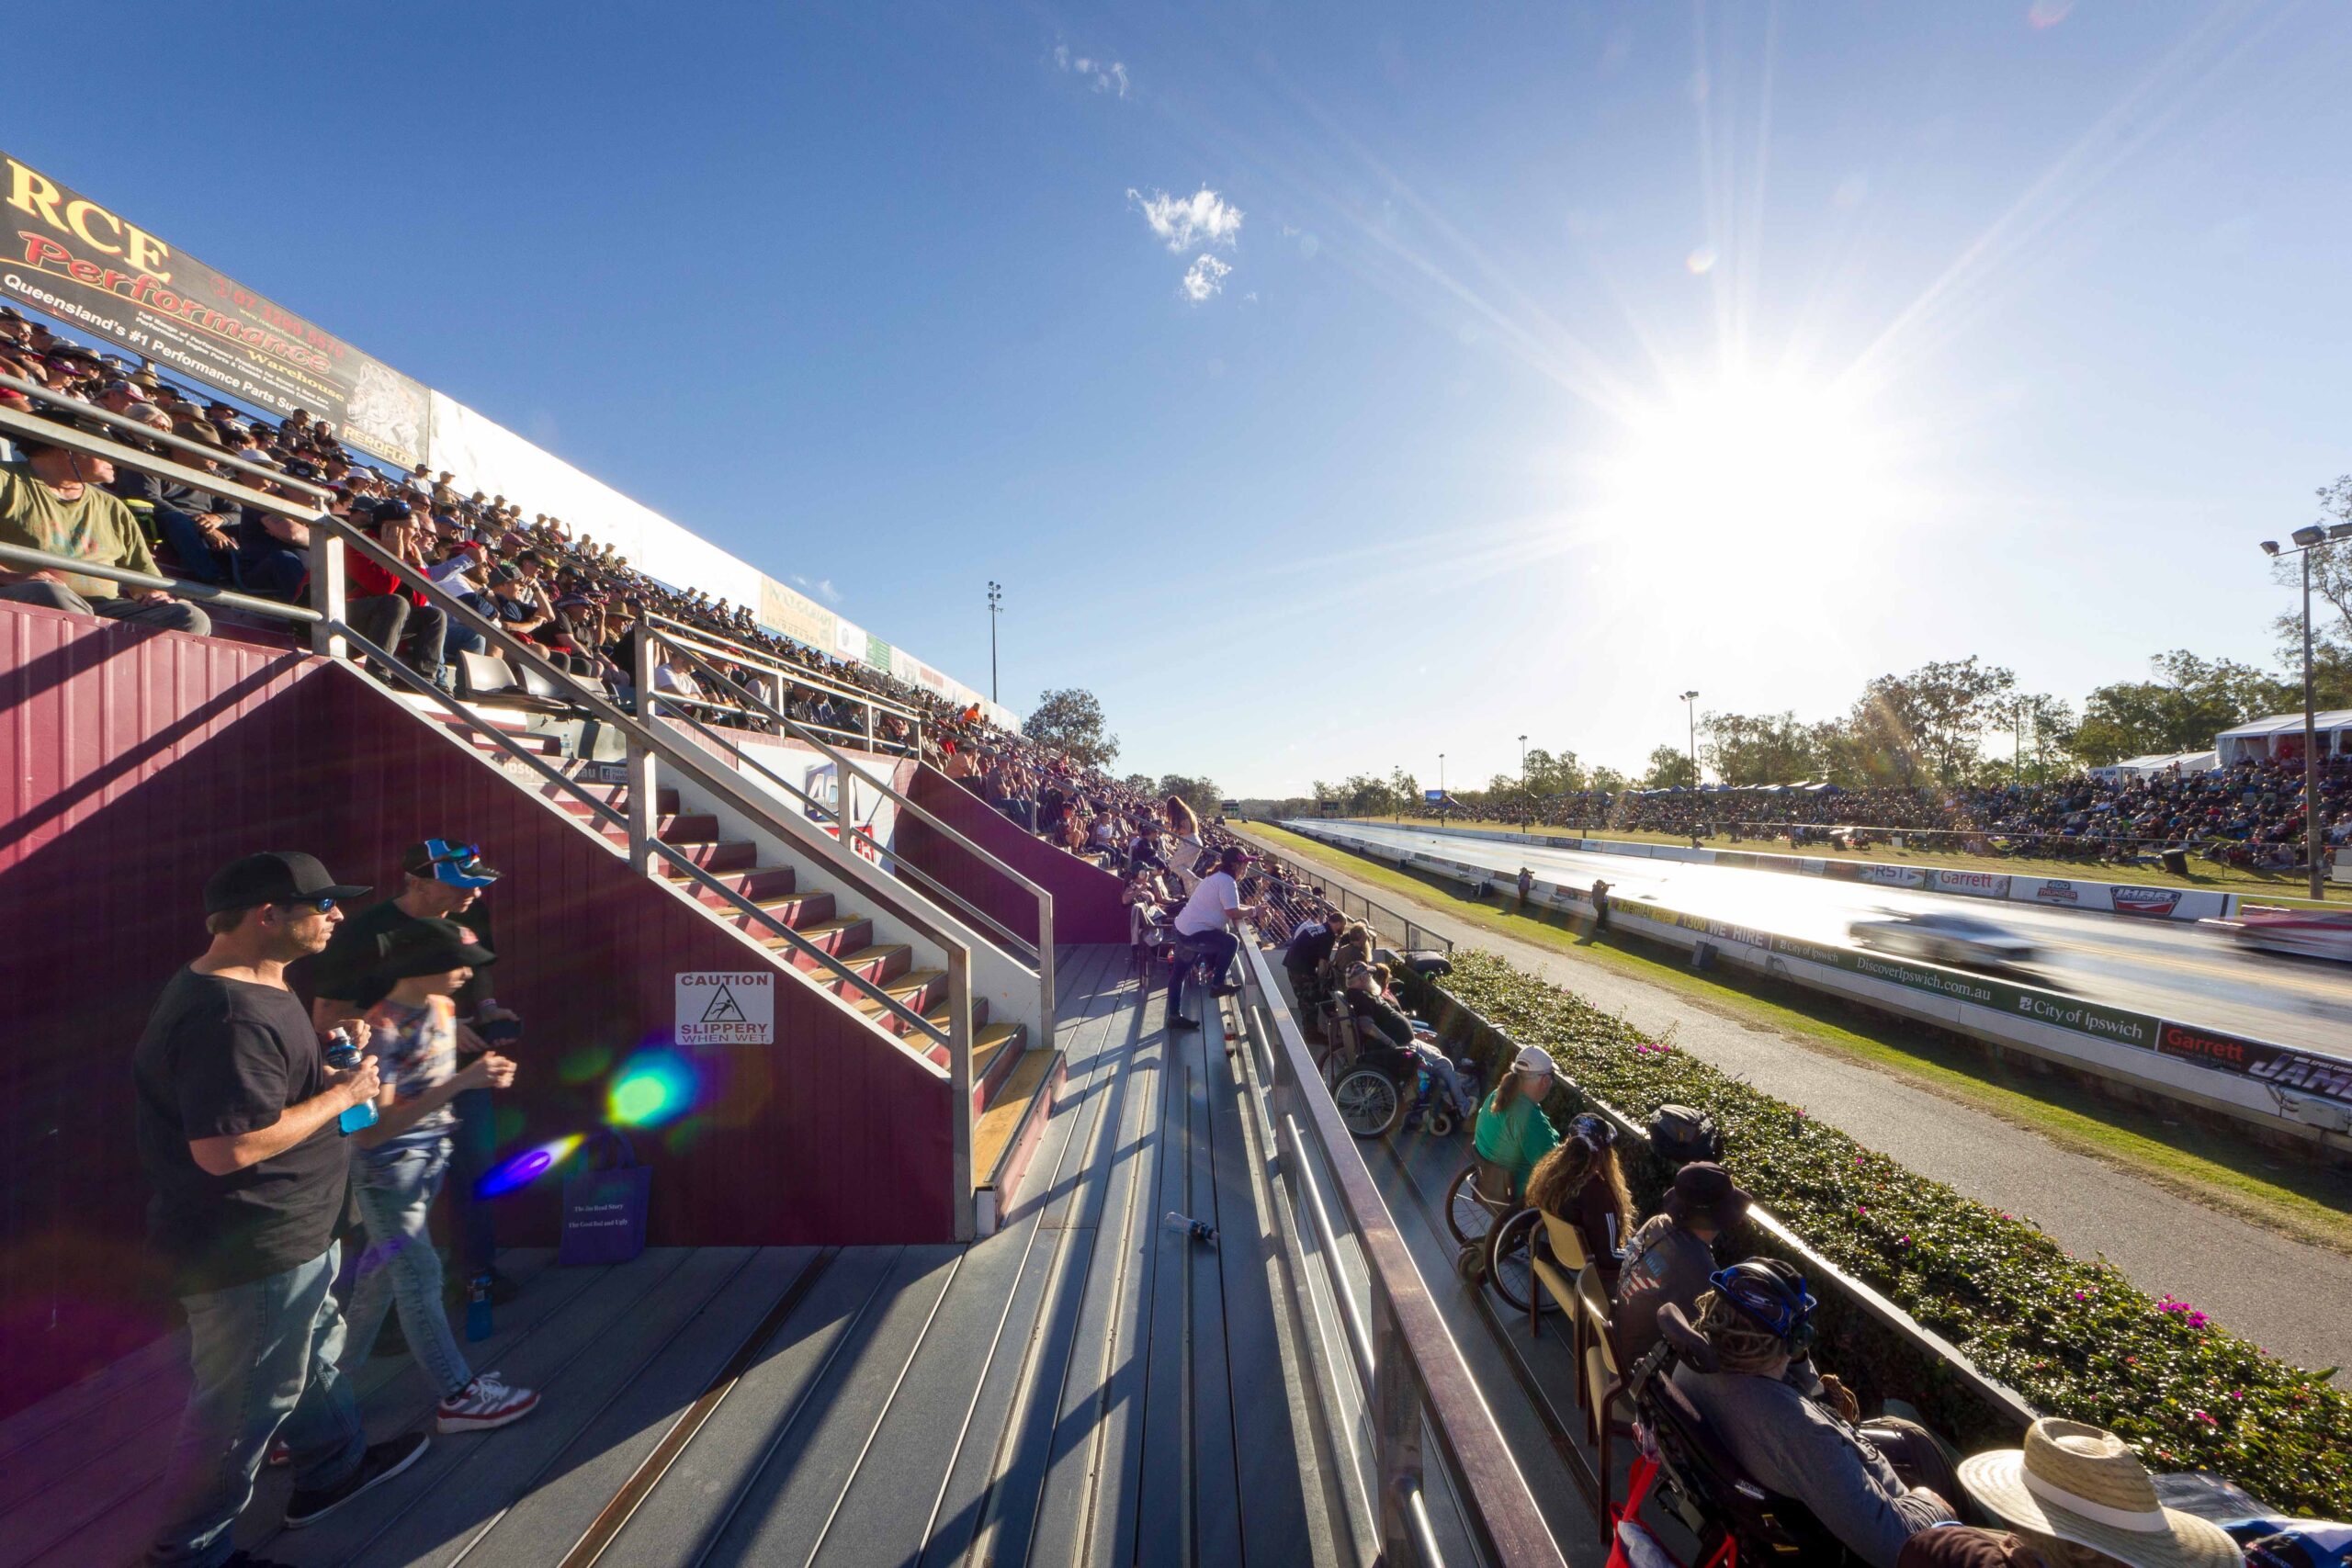 There's nothing like feeling the vibrations of the drag cars in the grandstands at Winternationals